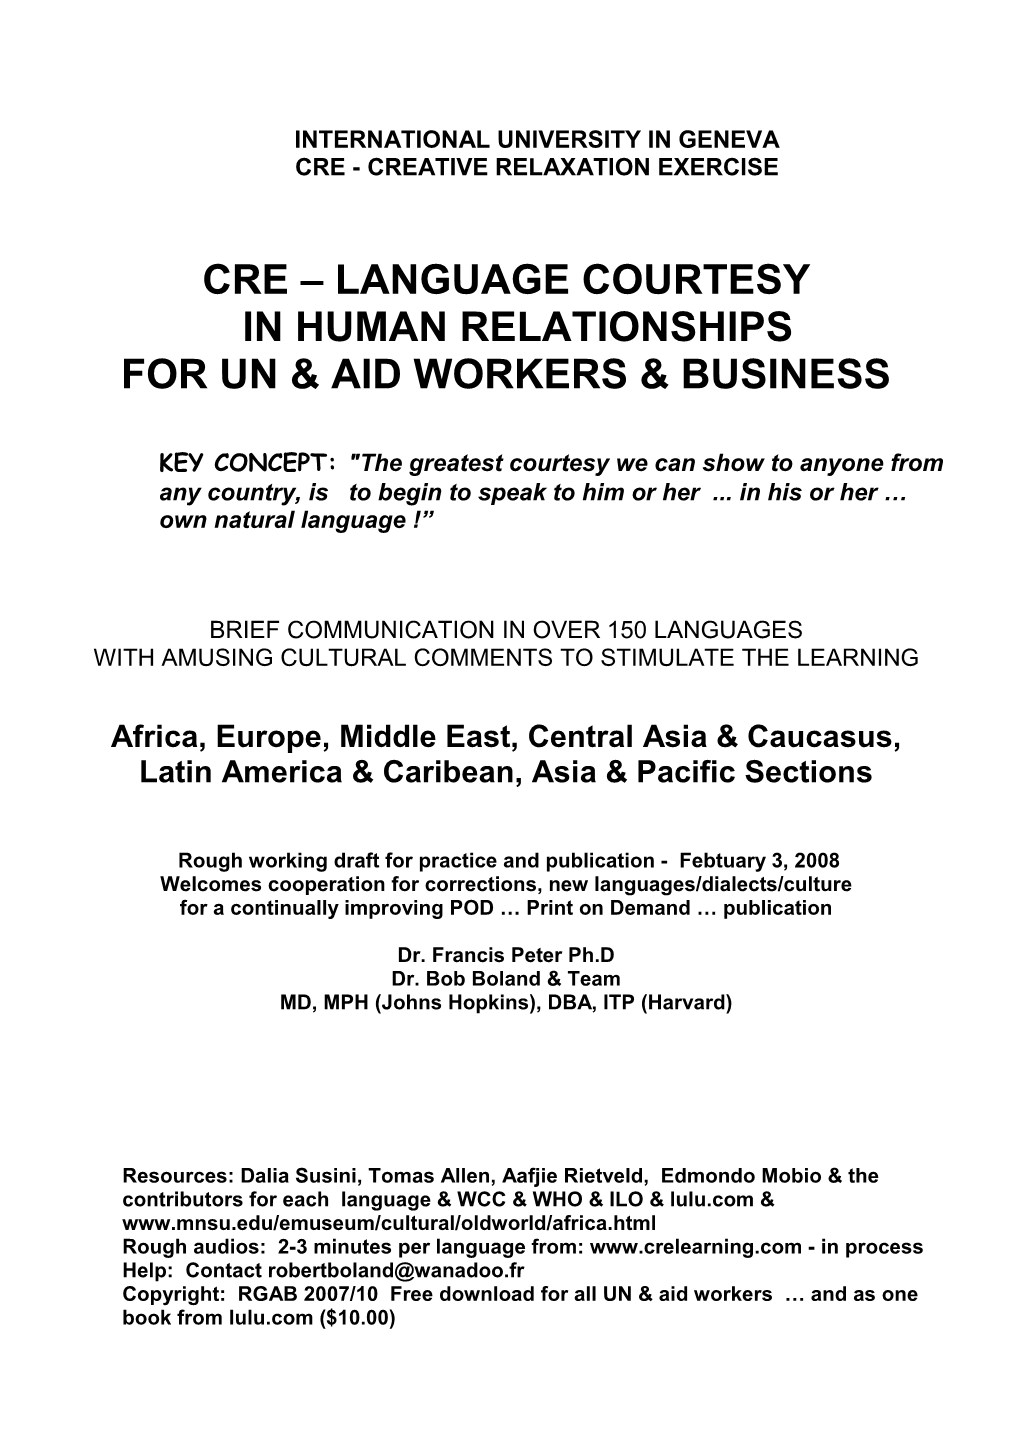 Language Courtesy in Human Relationships for Un & Aid Workers & Business